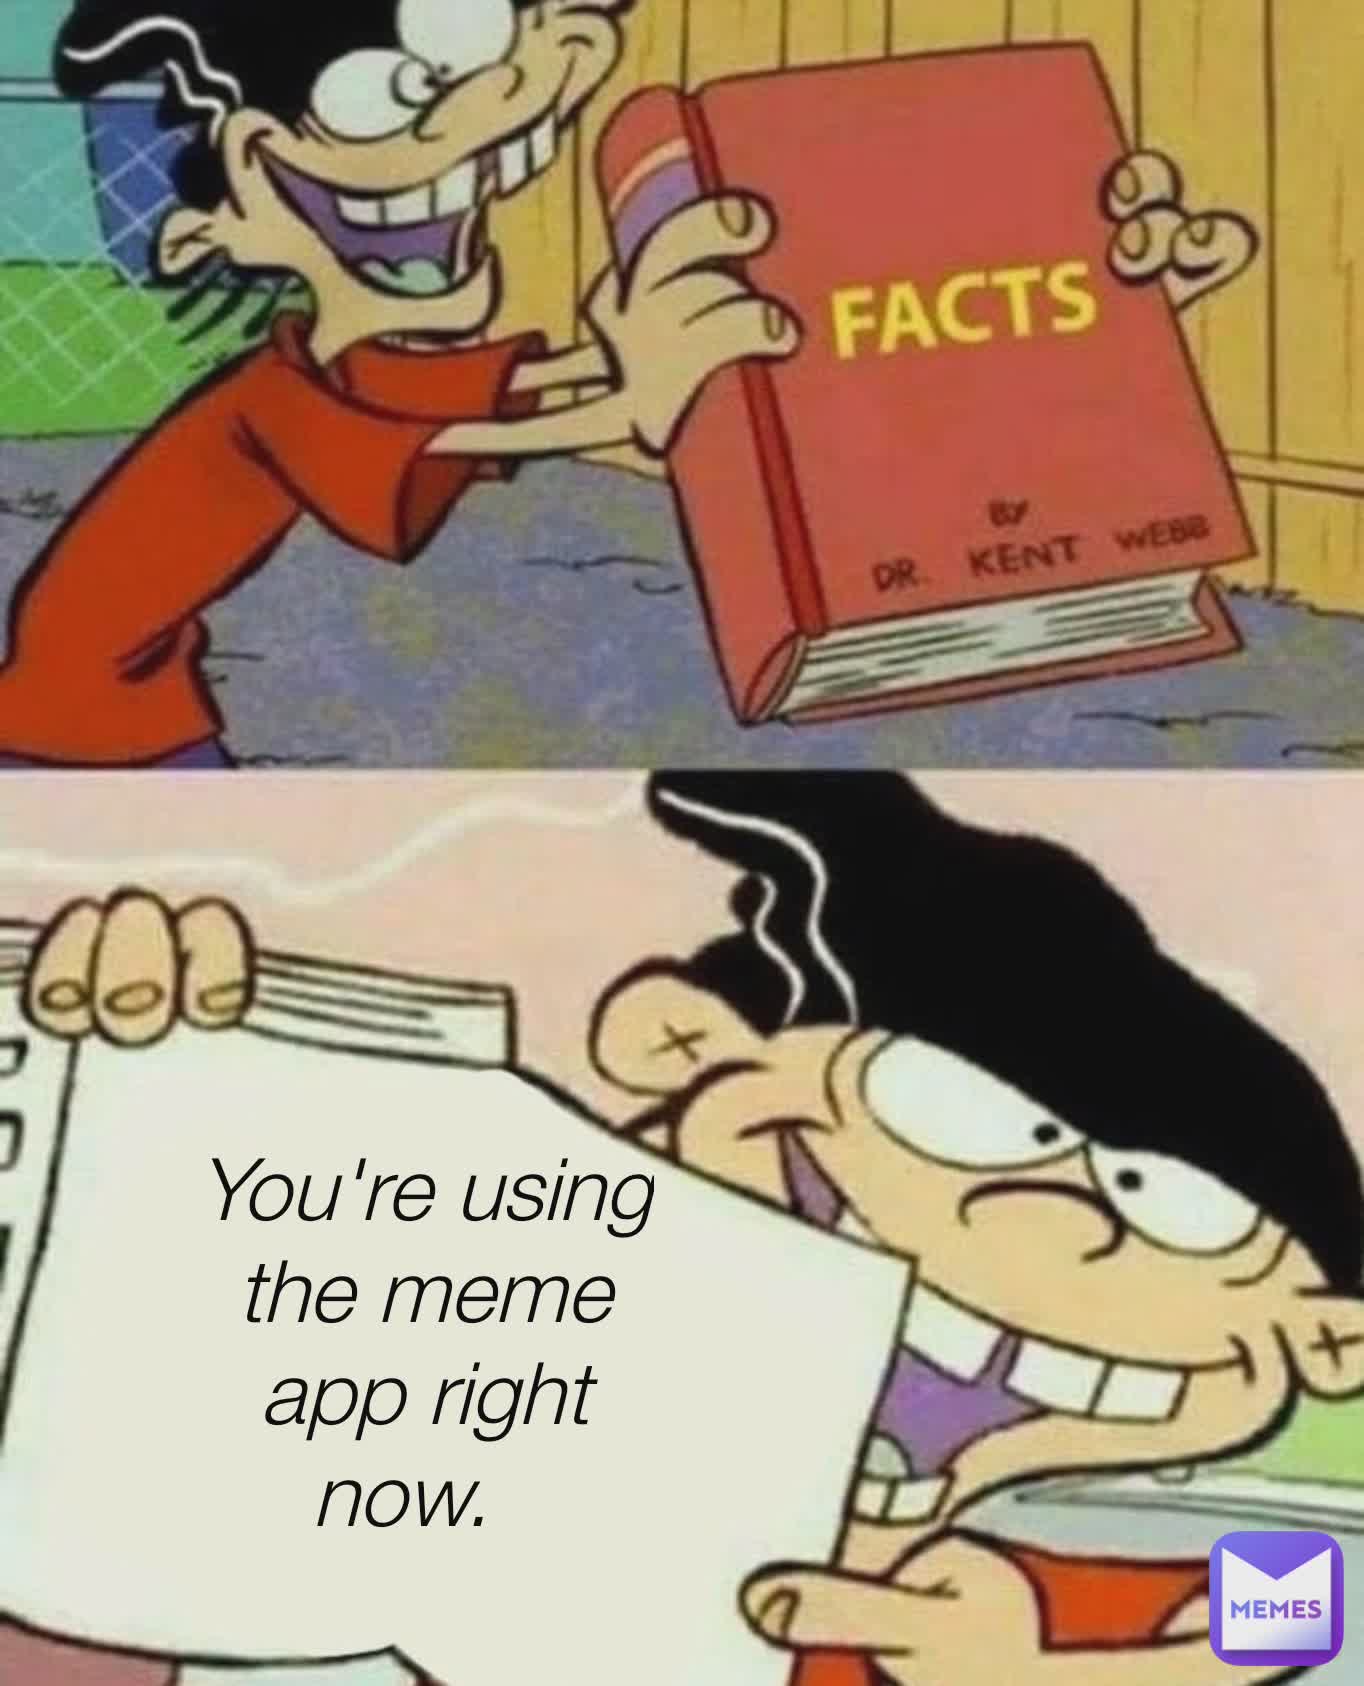 You're using the meme app right now.